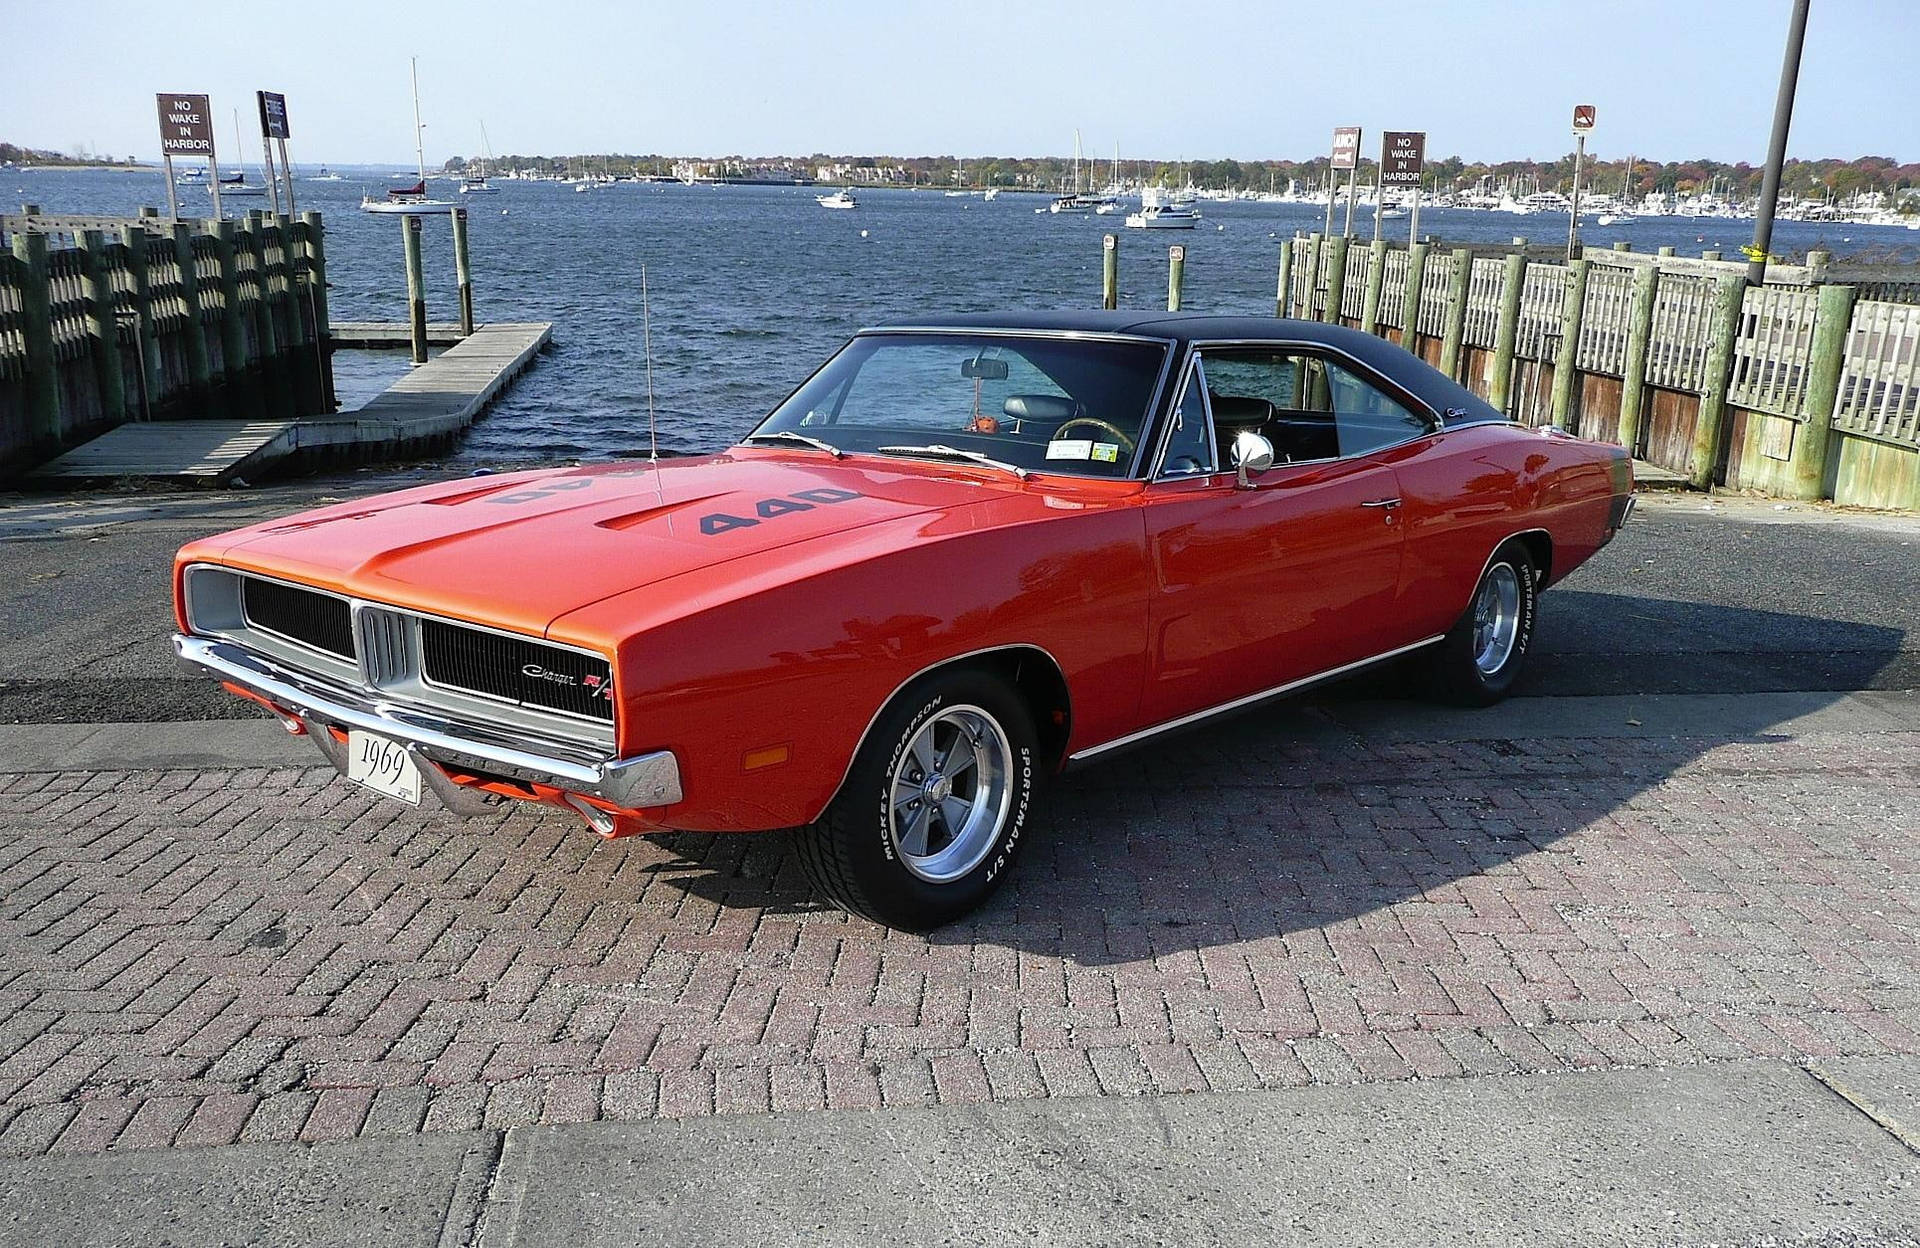 Pristine 1969 Dodge Charger Parked By The Bay Background